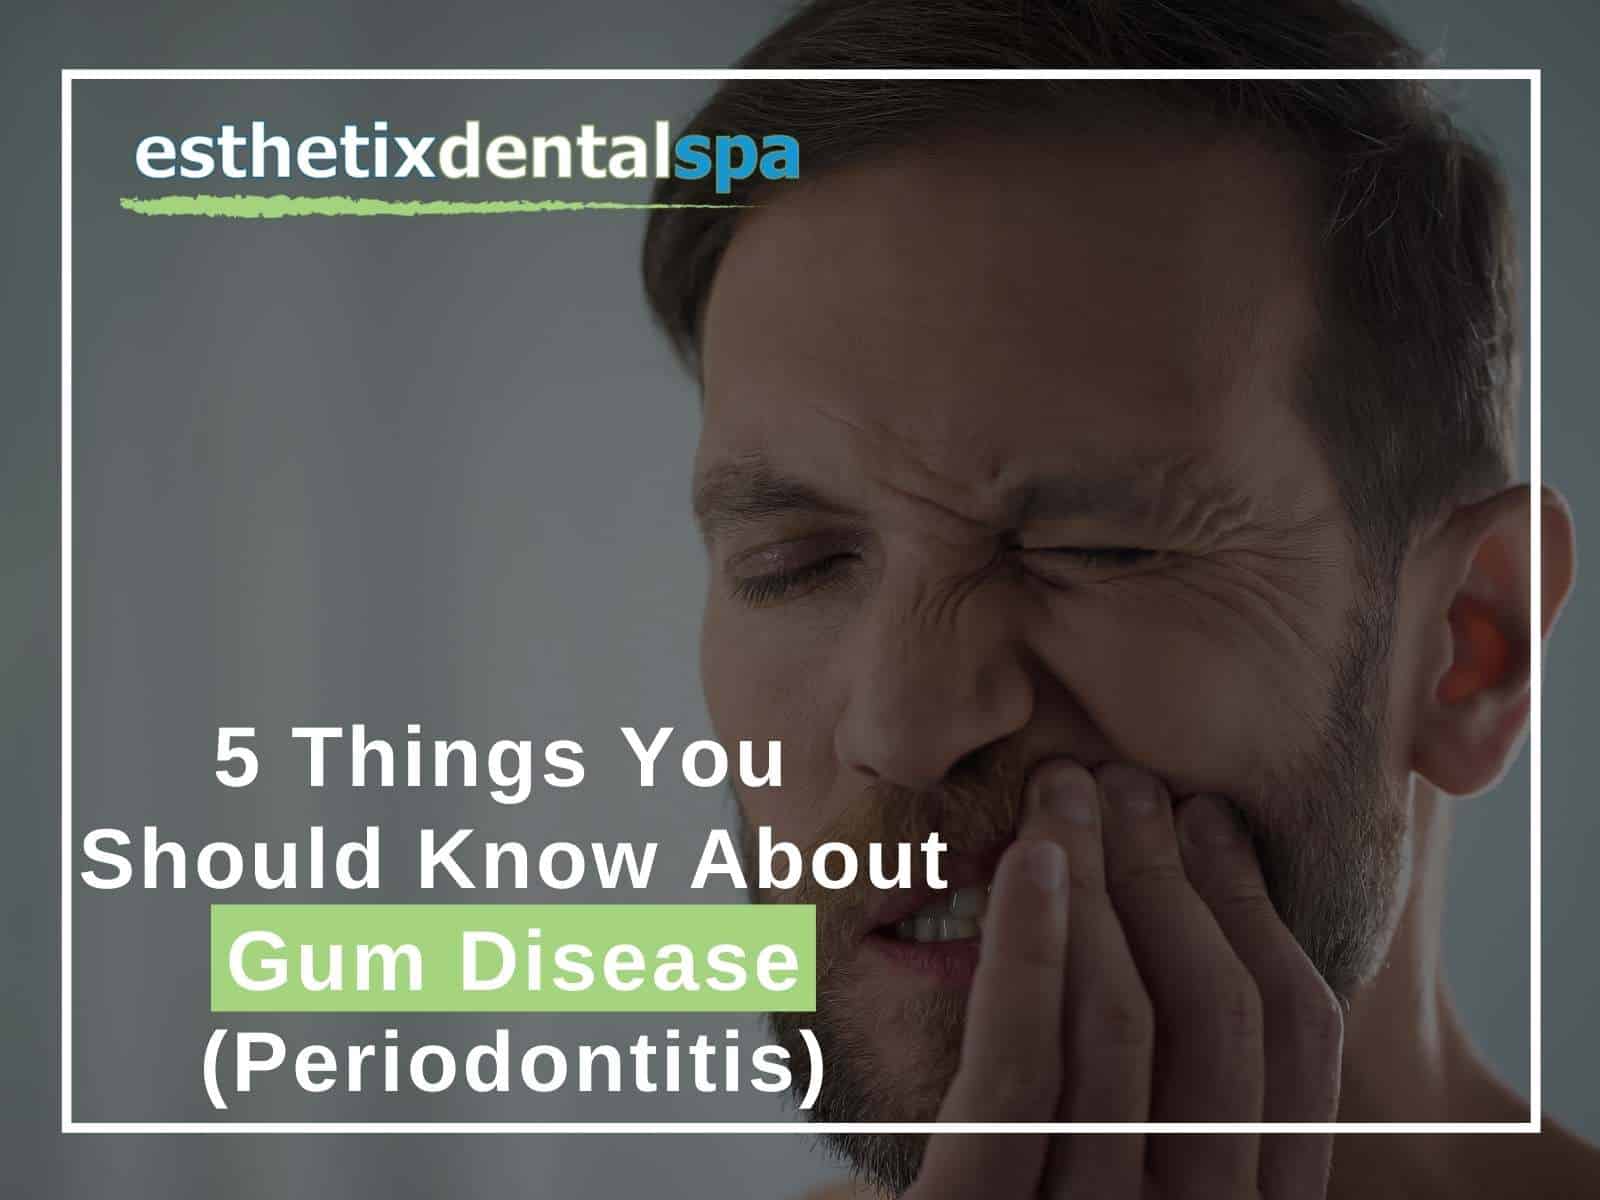 5 Things You Should Know About Gum Disease (Periodontitis)